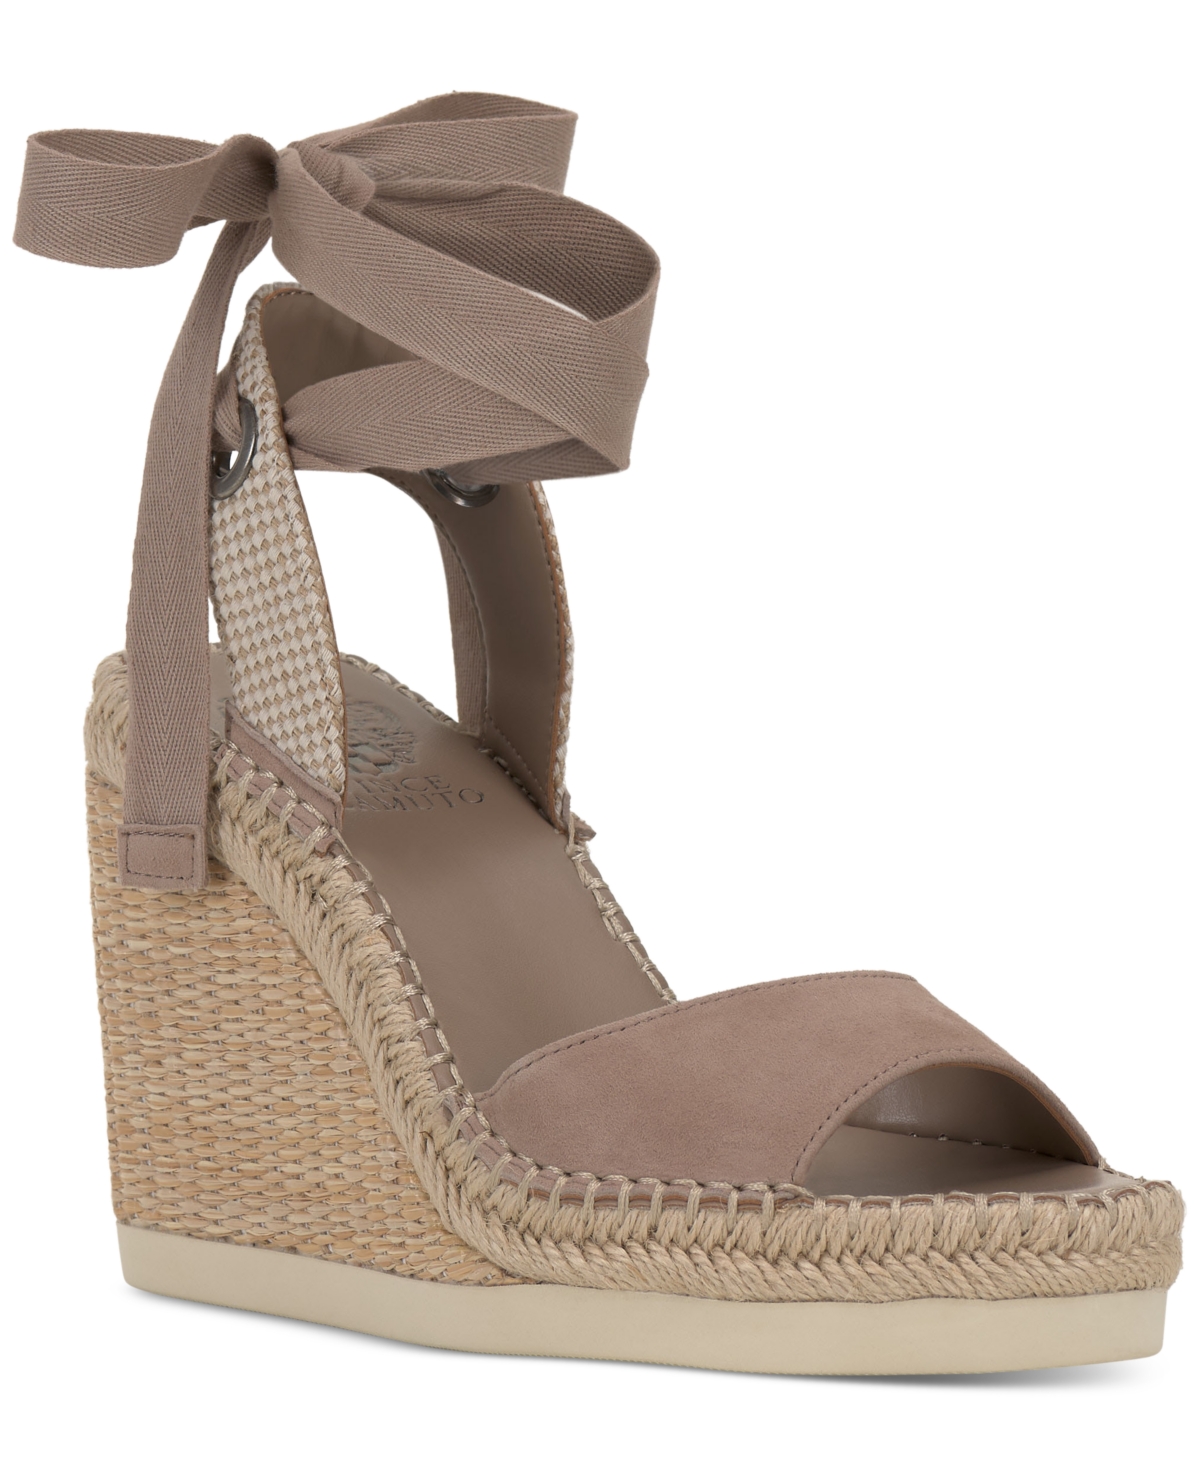 VINCE CAMUTO WOMEN'S BENDSEN ANKLE WRAP WEDGE SANDALS